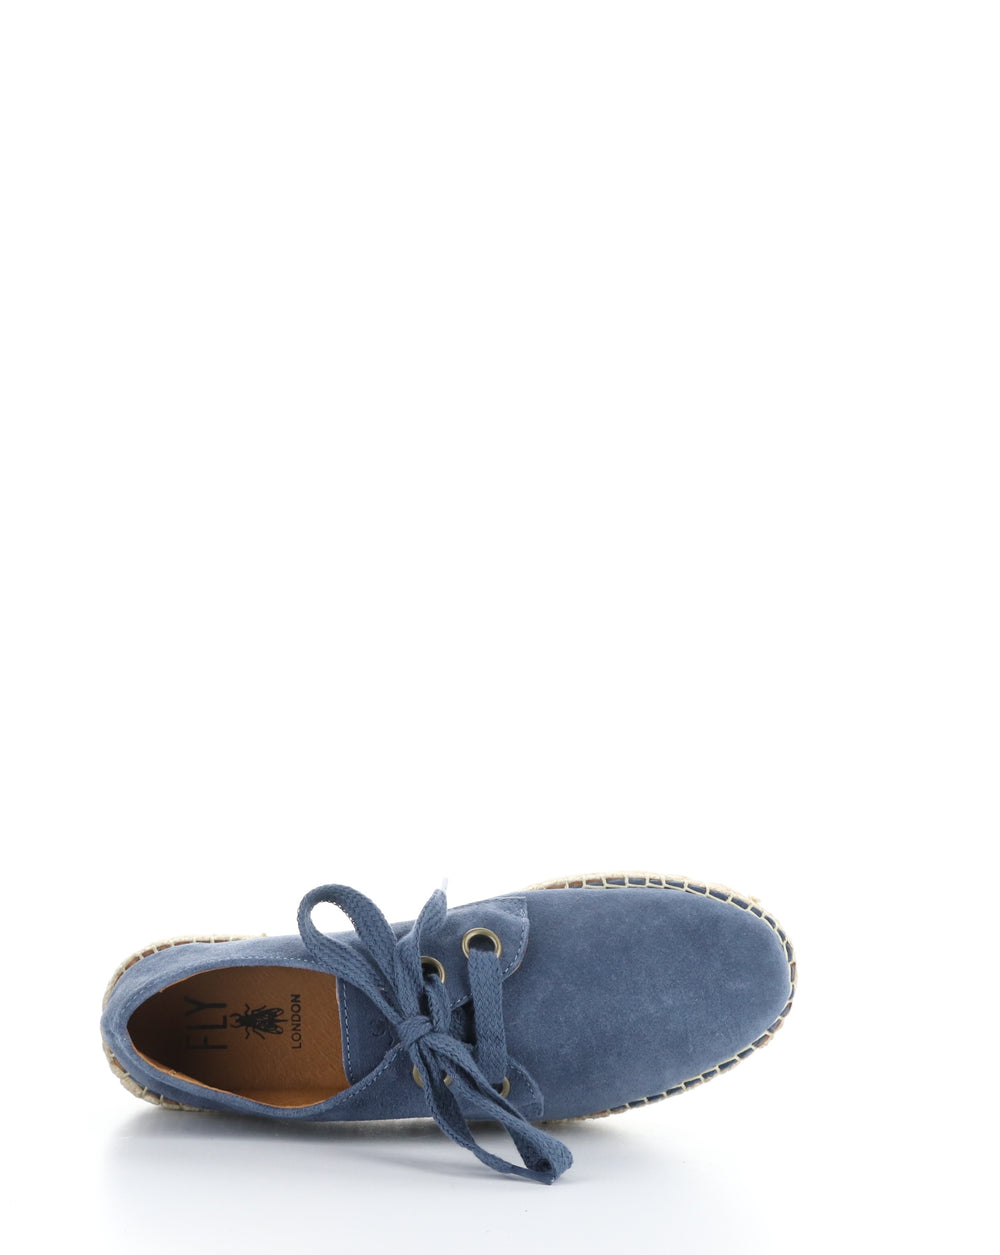 PETH525FLY 000 JEANS Lace-up Shoes